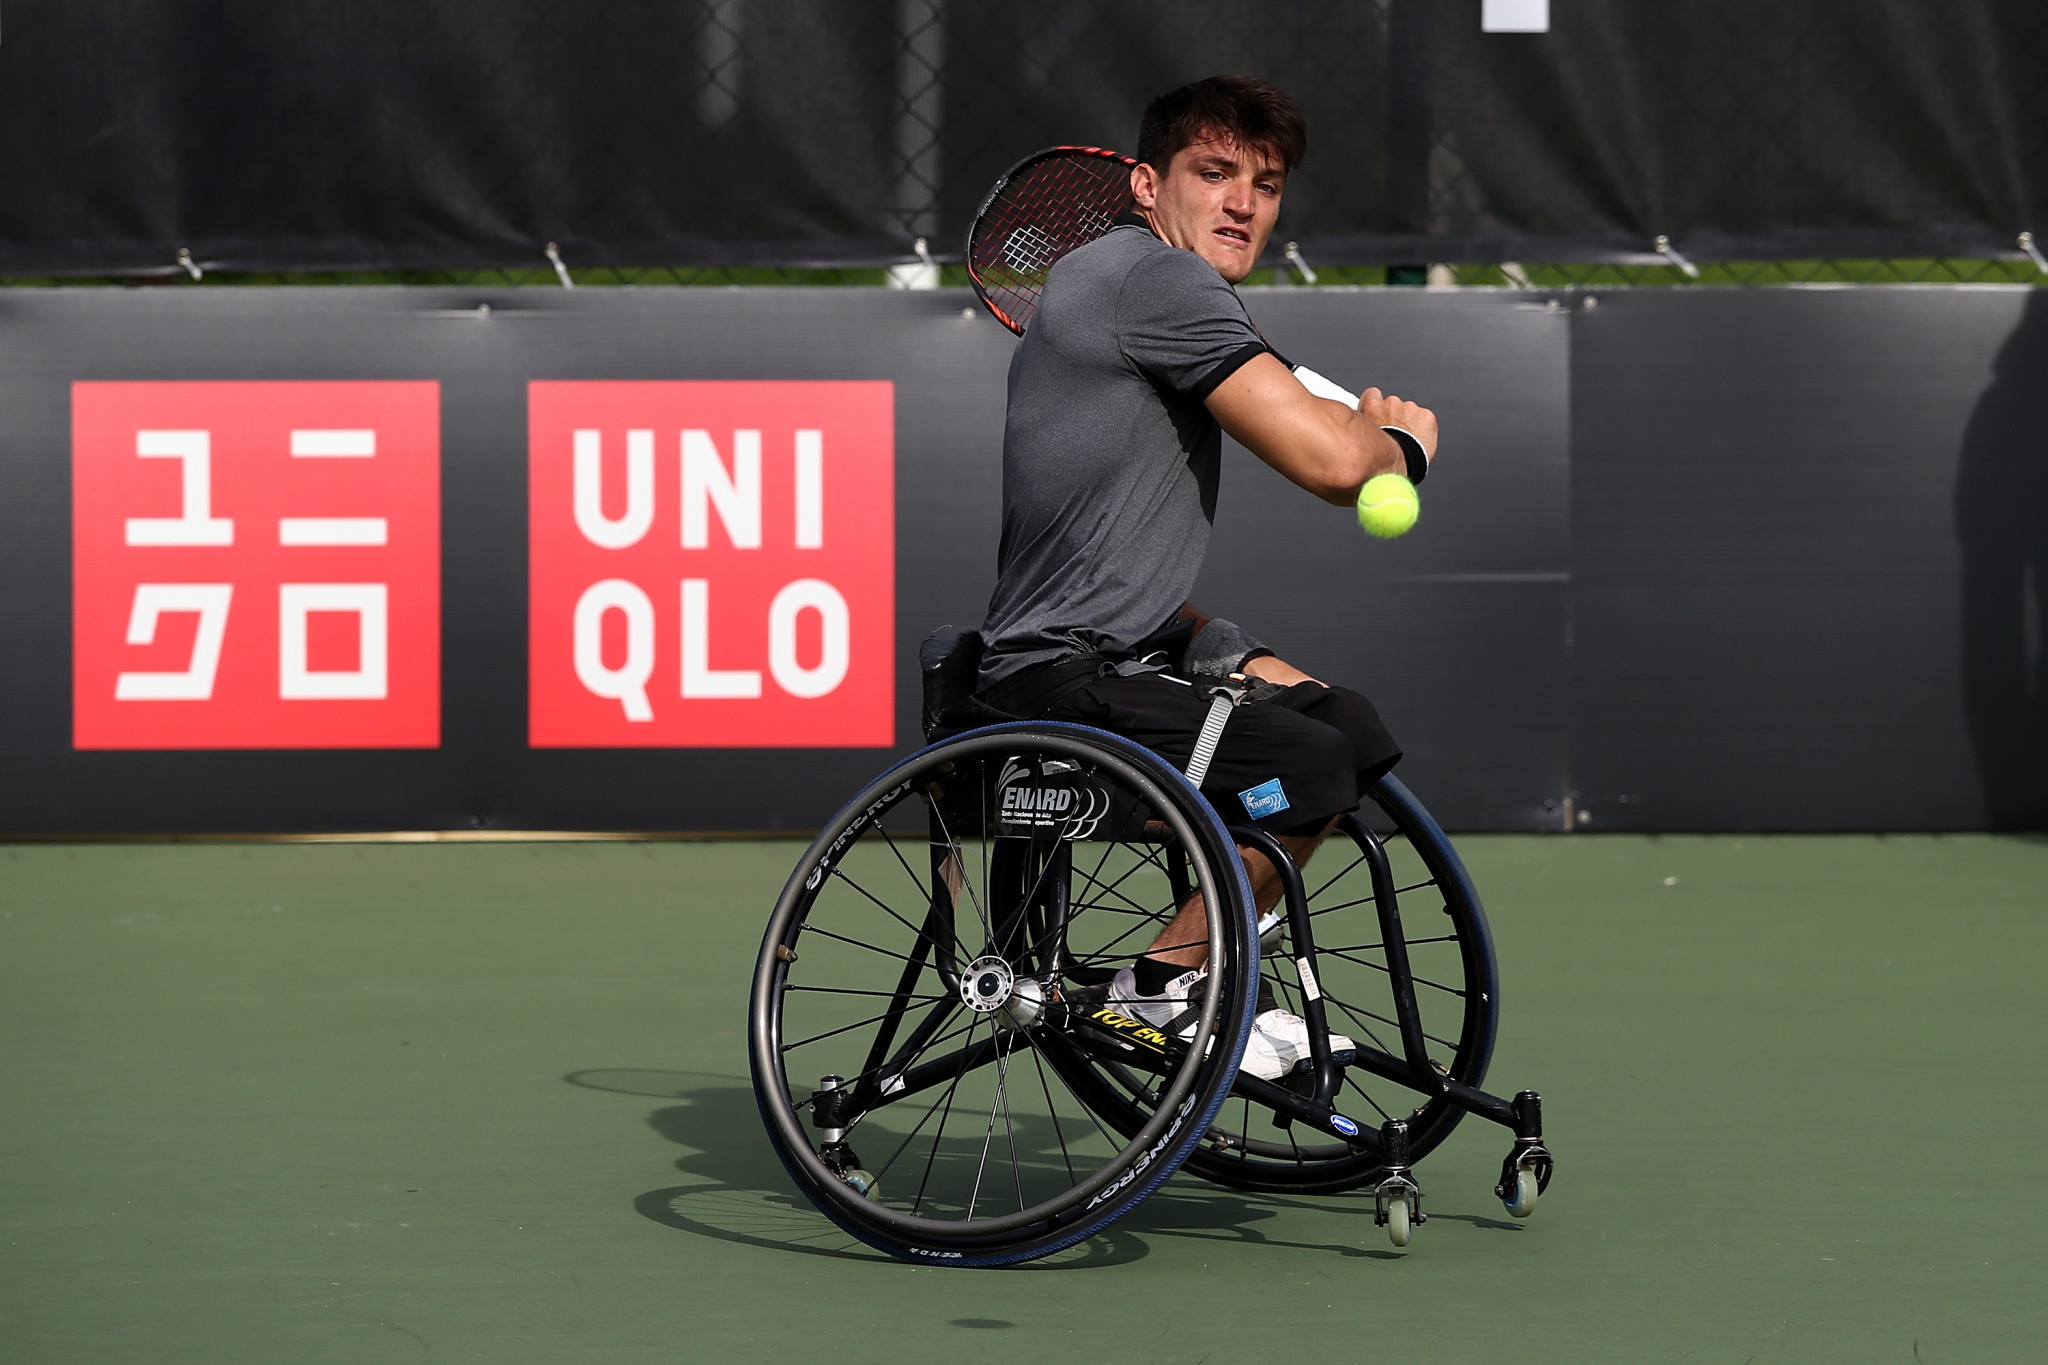 Argentina's Gustavo Fernández booked his place in the men's singles final ©Getty Images